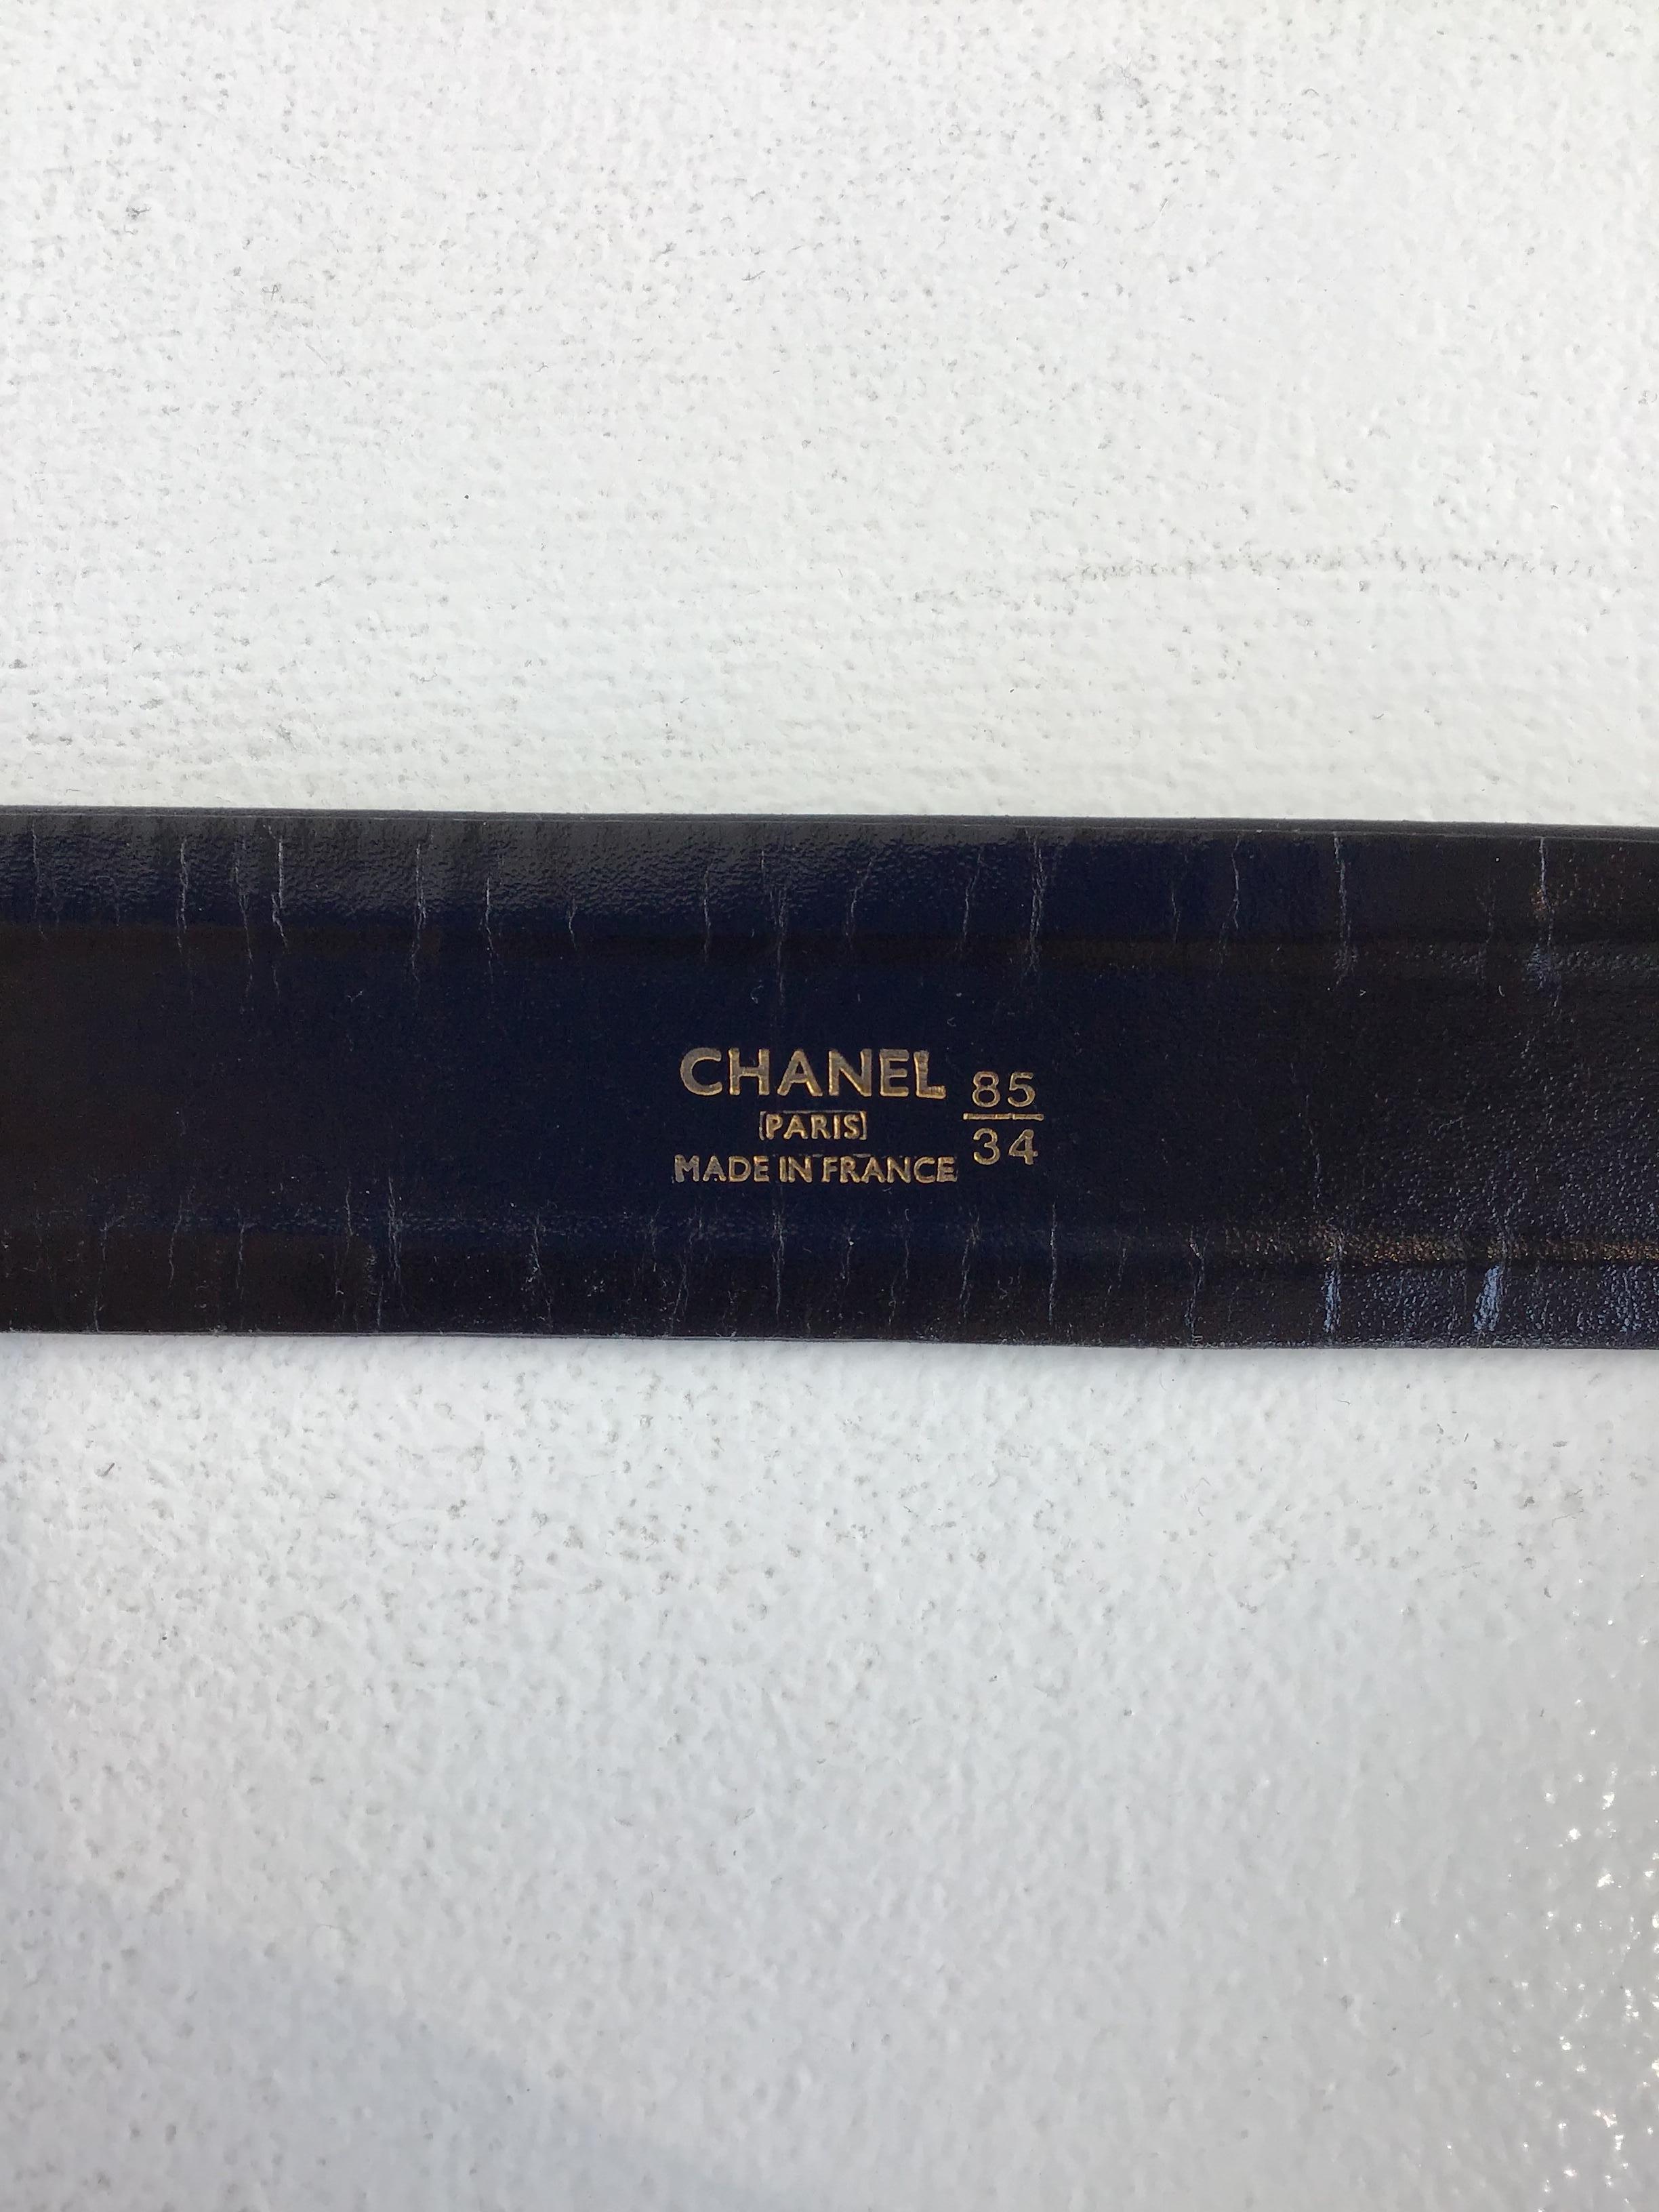 Chanel Black Leather Belt with Gold Chain. Featuring a thick leather strap with gold tone square metal buckle that reads CHANEL. Chain includes signature coin charm. Made in France. Size 34.